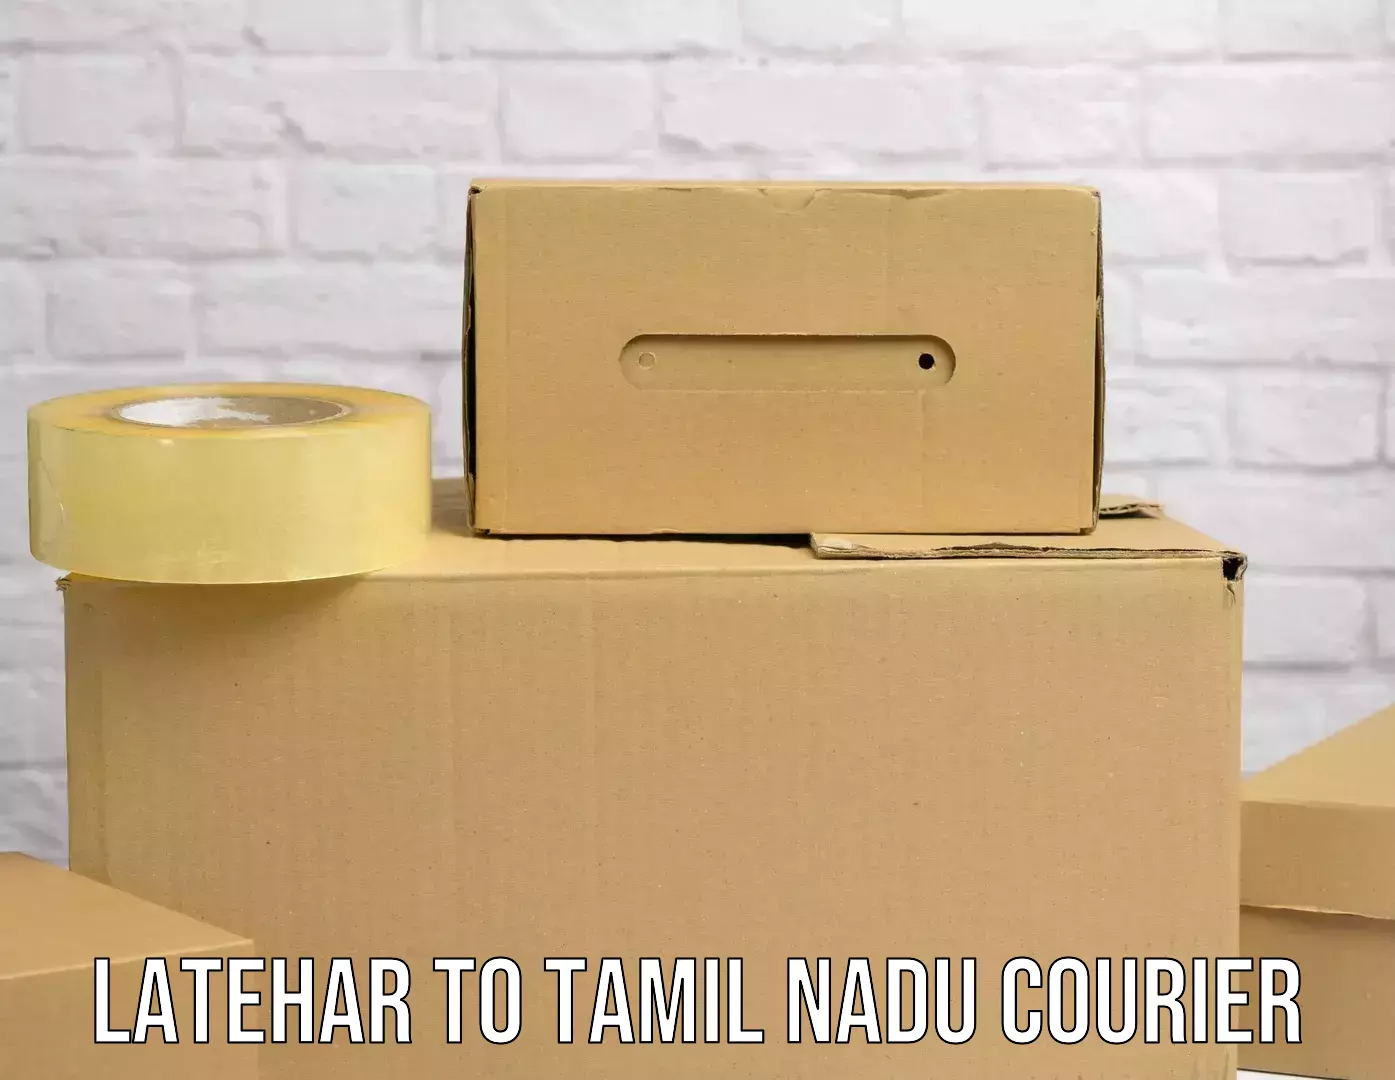 Cost-effective courier options Latehar to Palacode